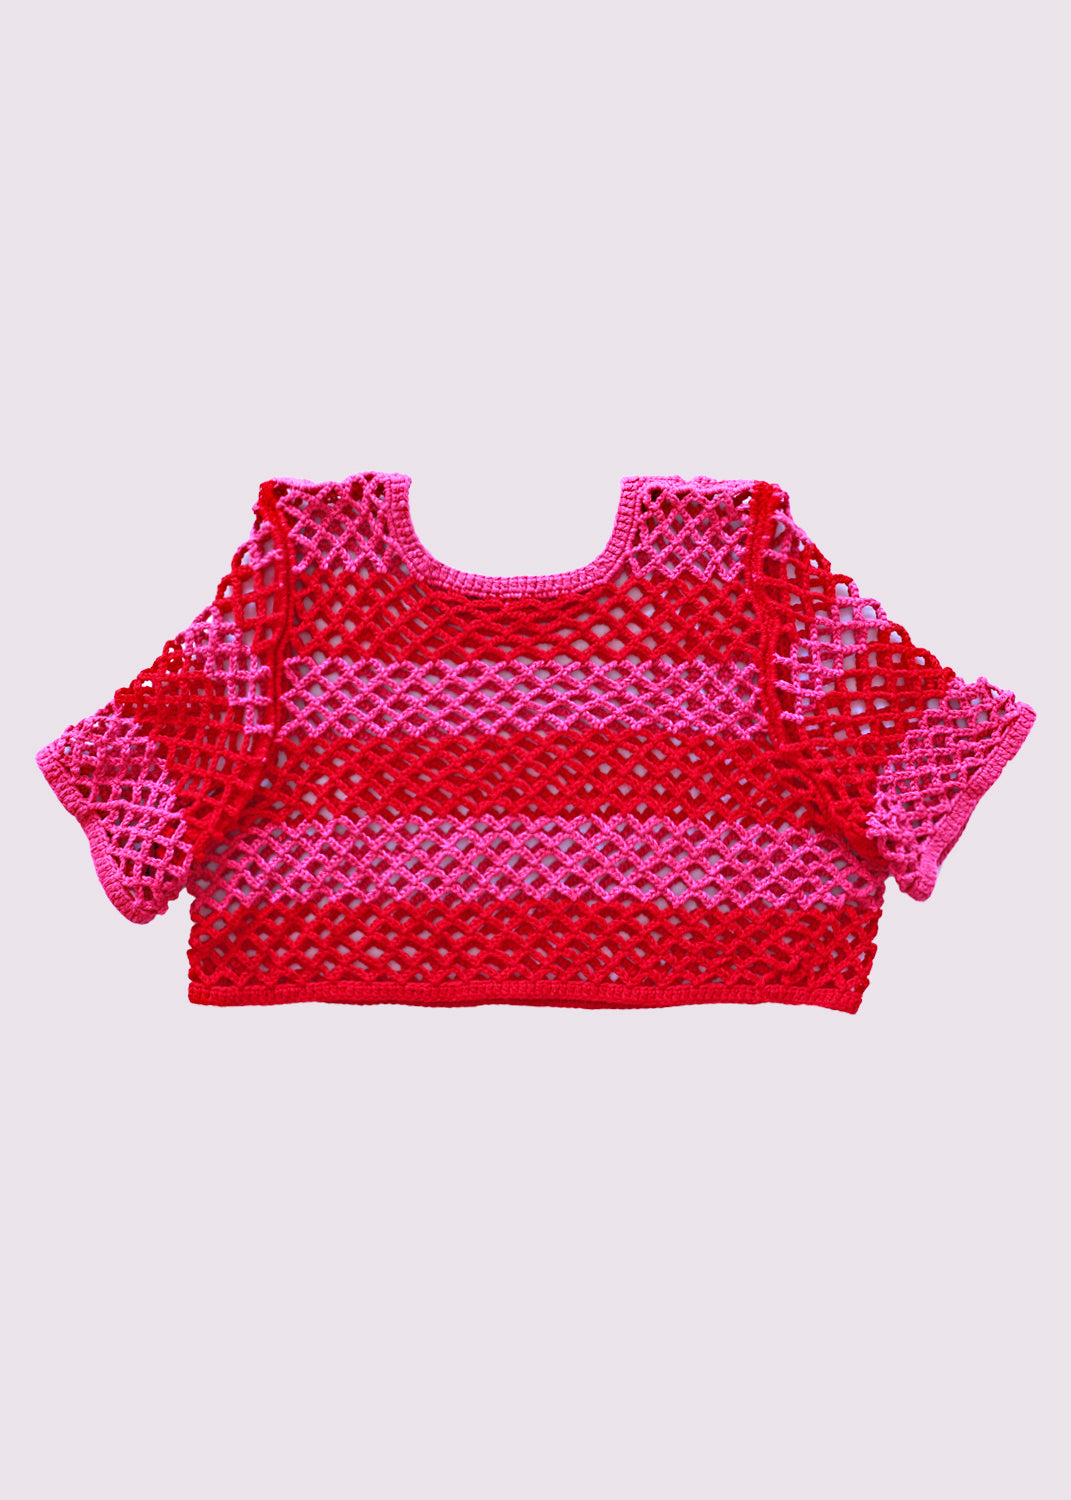 Fishnet Crop Top in Pink and Red